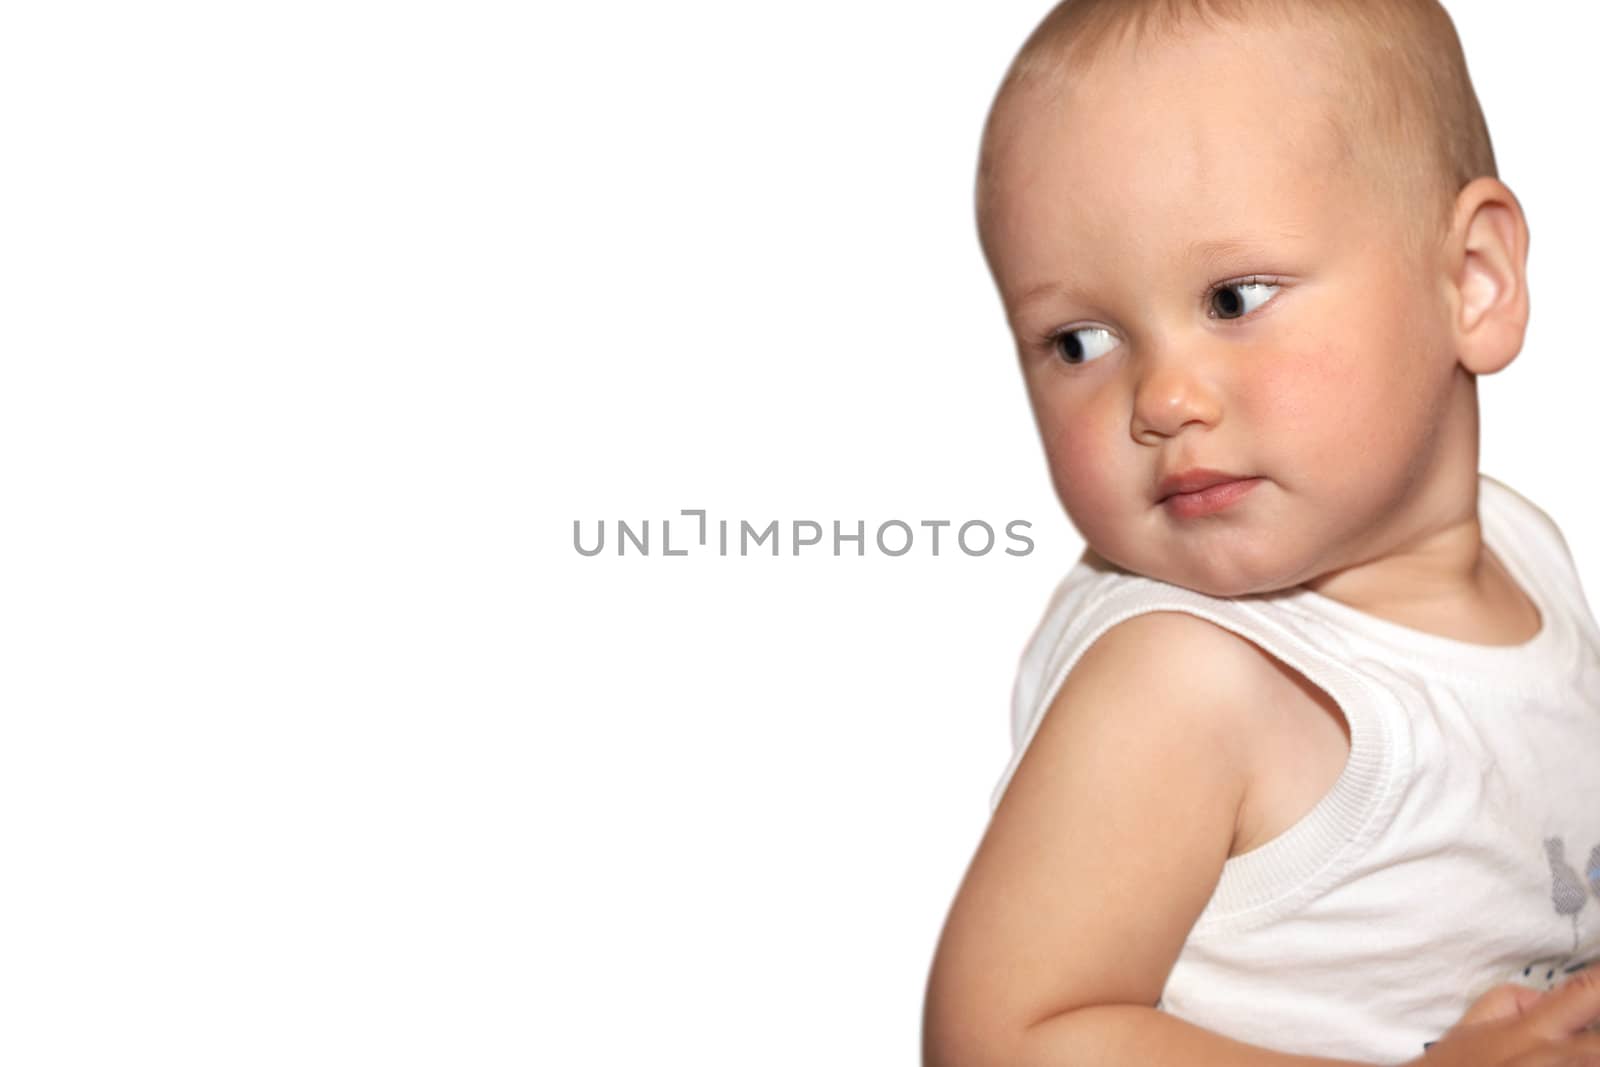 The beautiful child with the large eyes on a white background